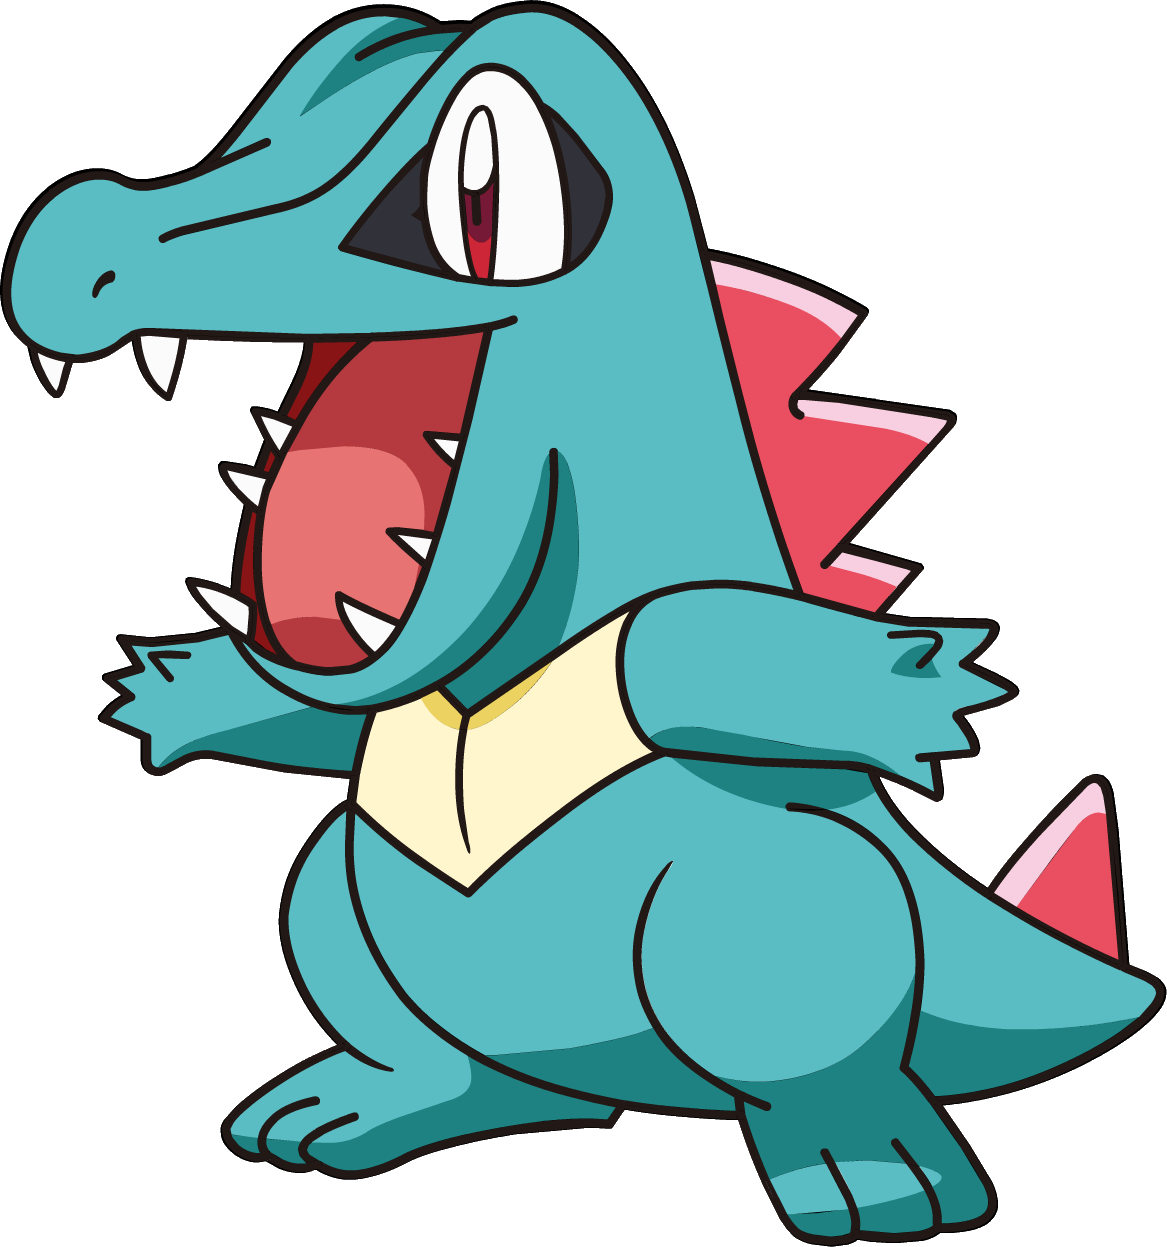 http://img1.wikia.nocookie.net/__cb20150102063551/pokemon/images/d/d6/158Totodile_OS_anime.png